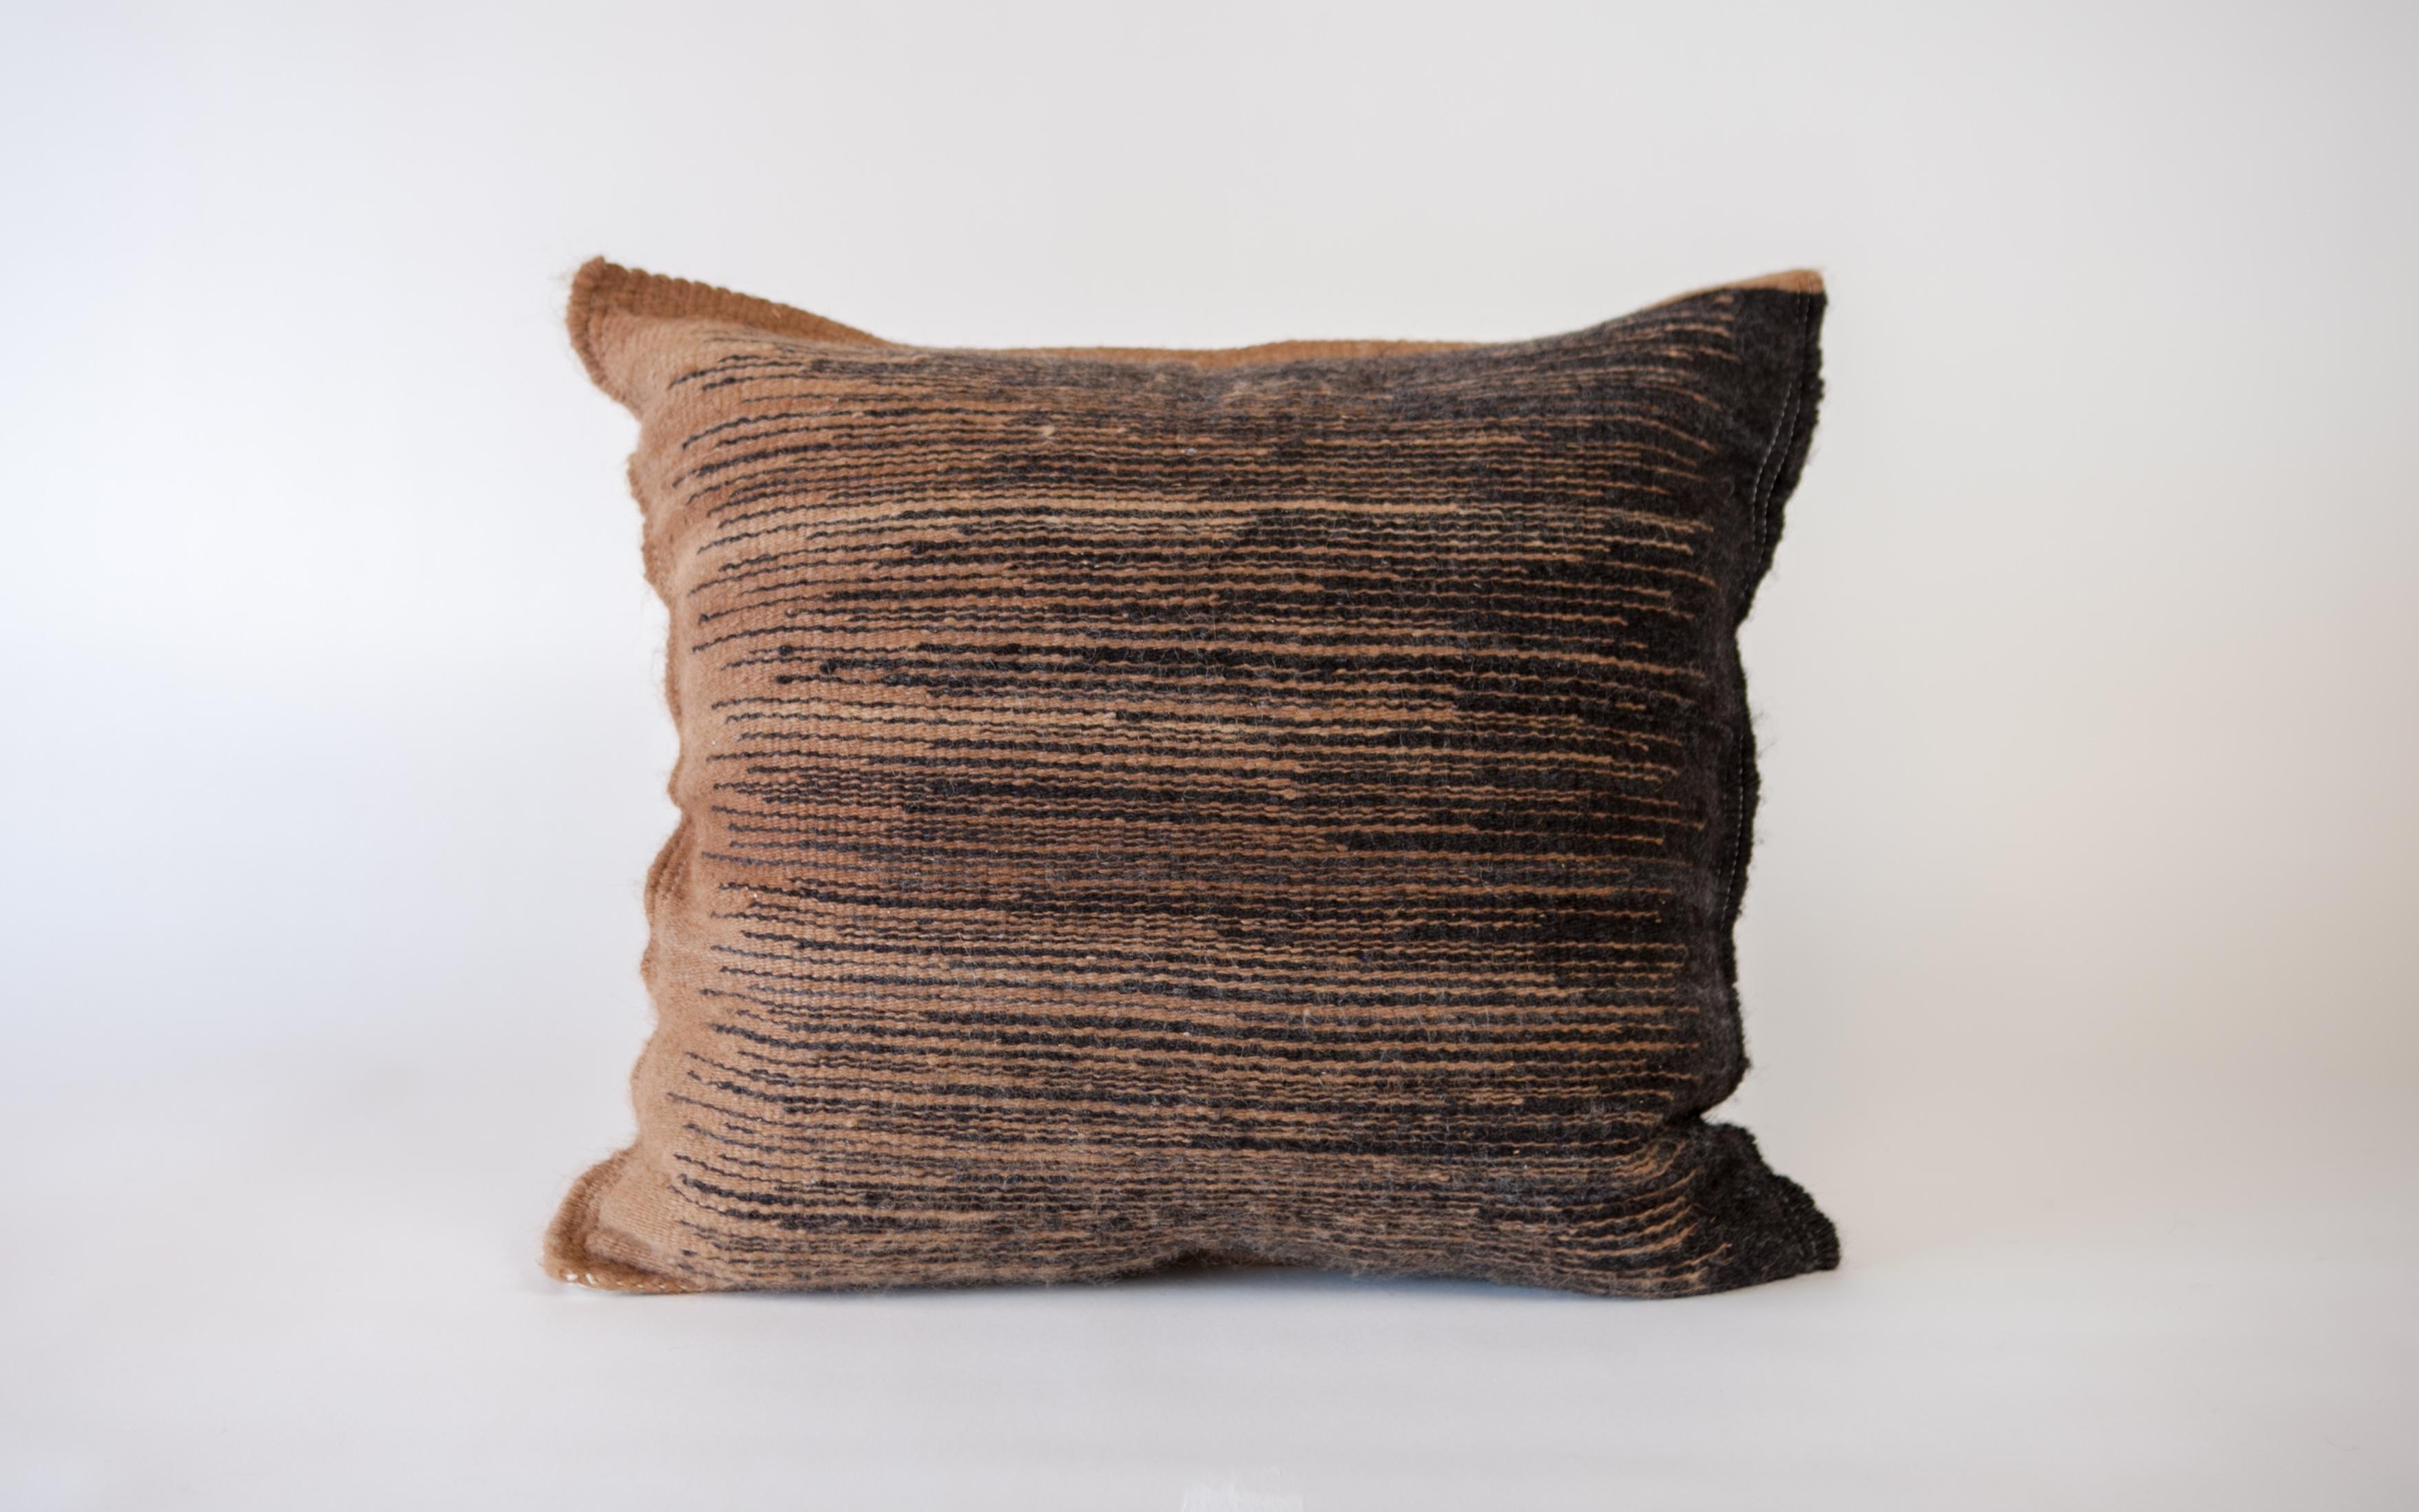 Argentine Handwoven Llama Wool Throw Pillow in Chocolate Brown and Black from Argentina For Sale